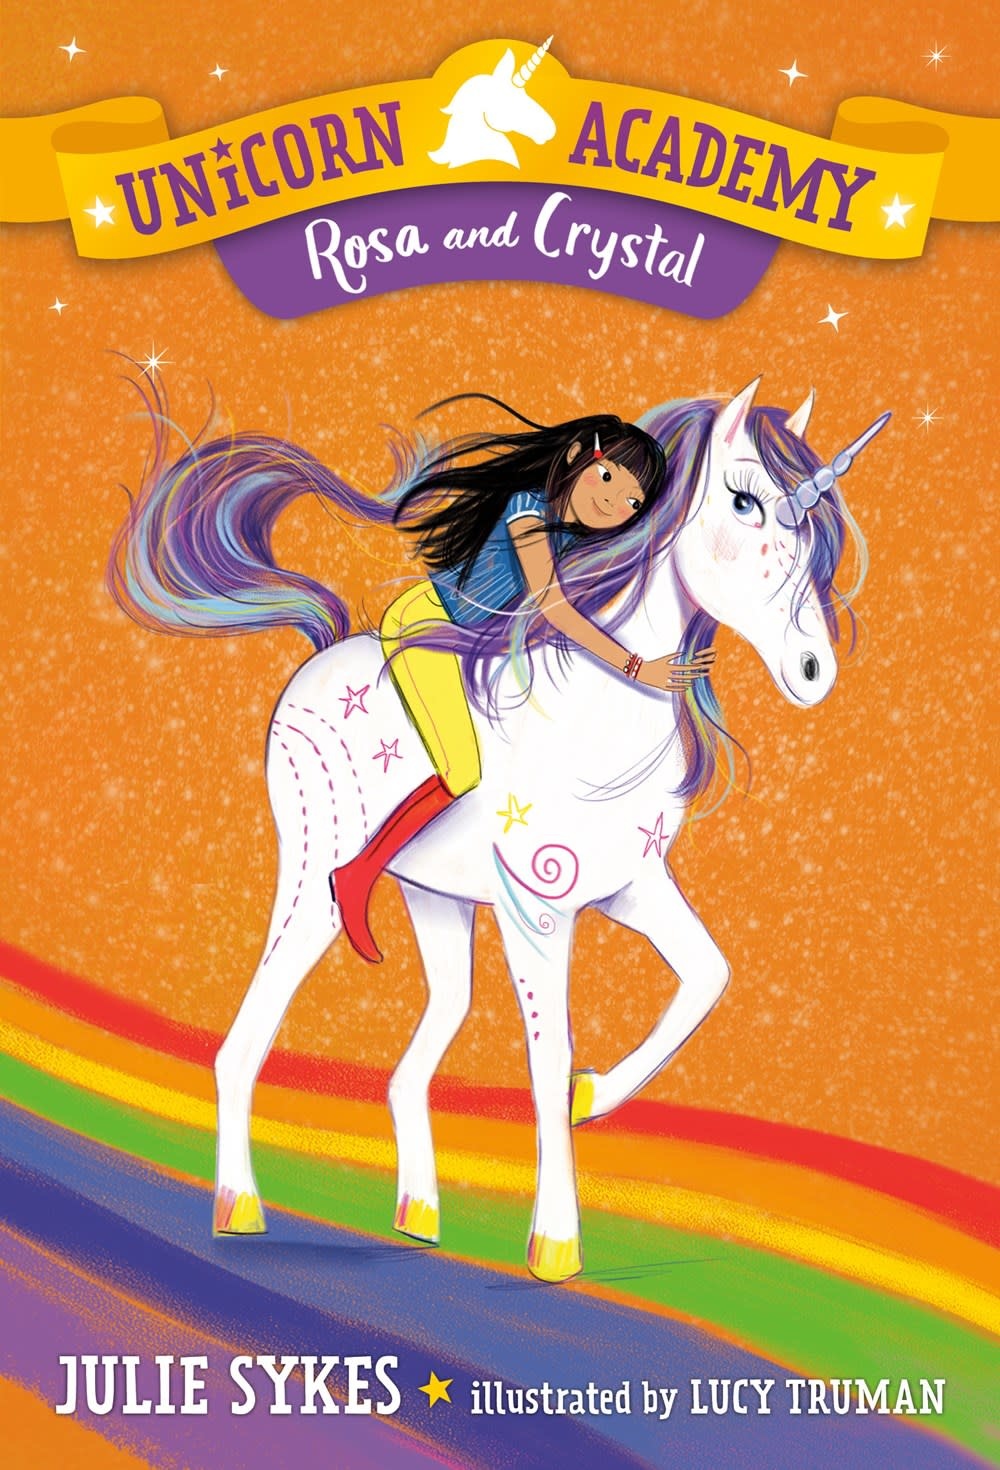 Random House Books for Young Readers Unicorn Academy #7 Rosa and Crystal